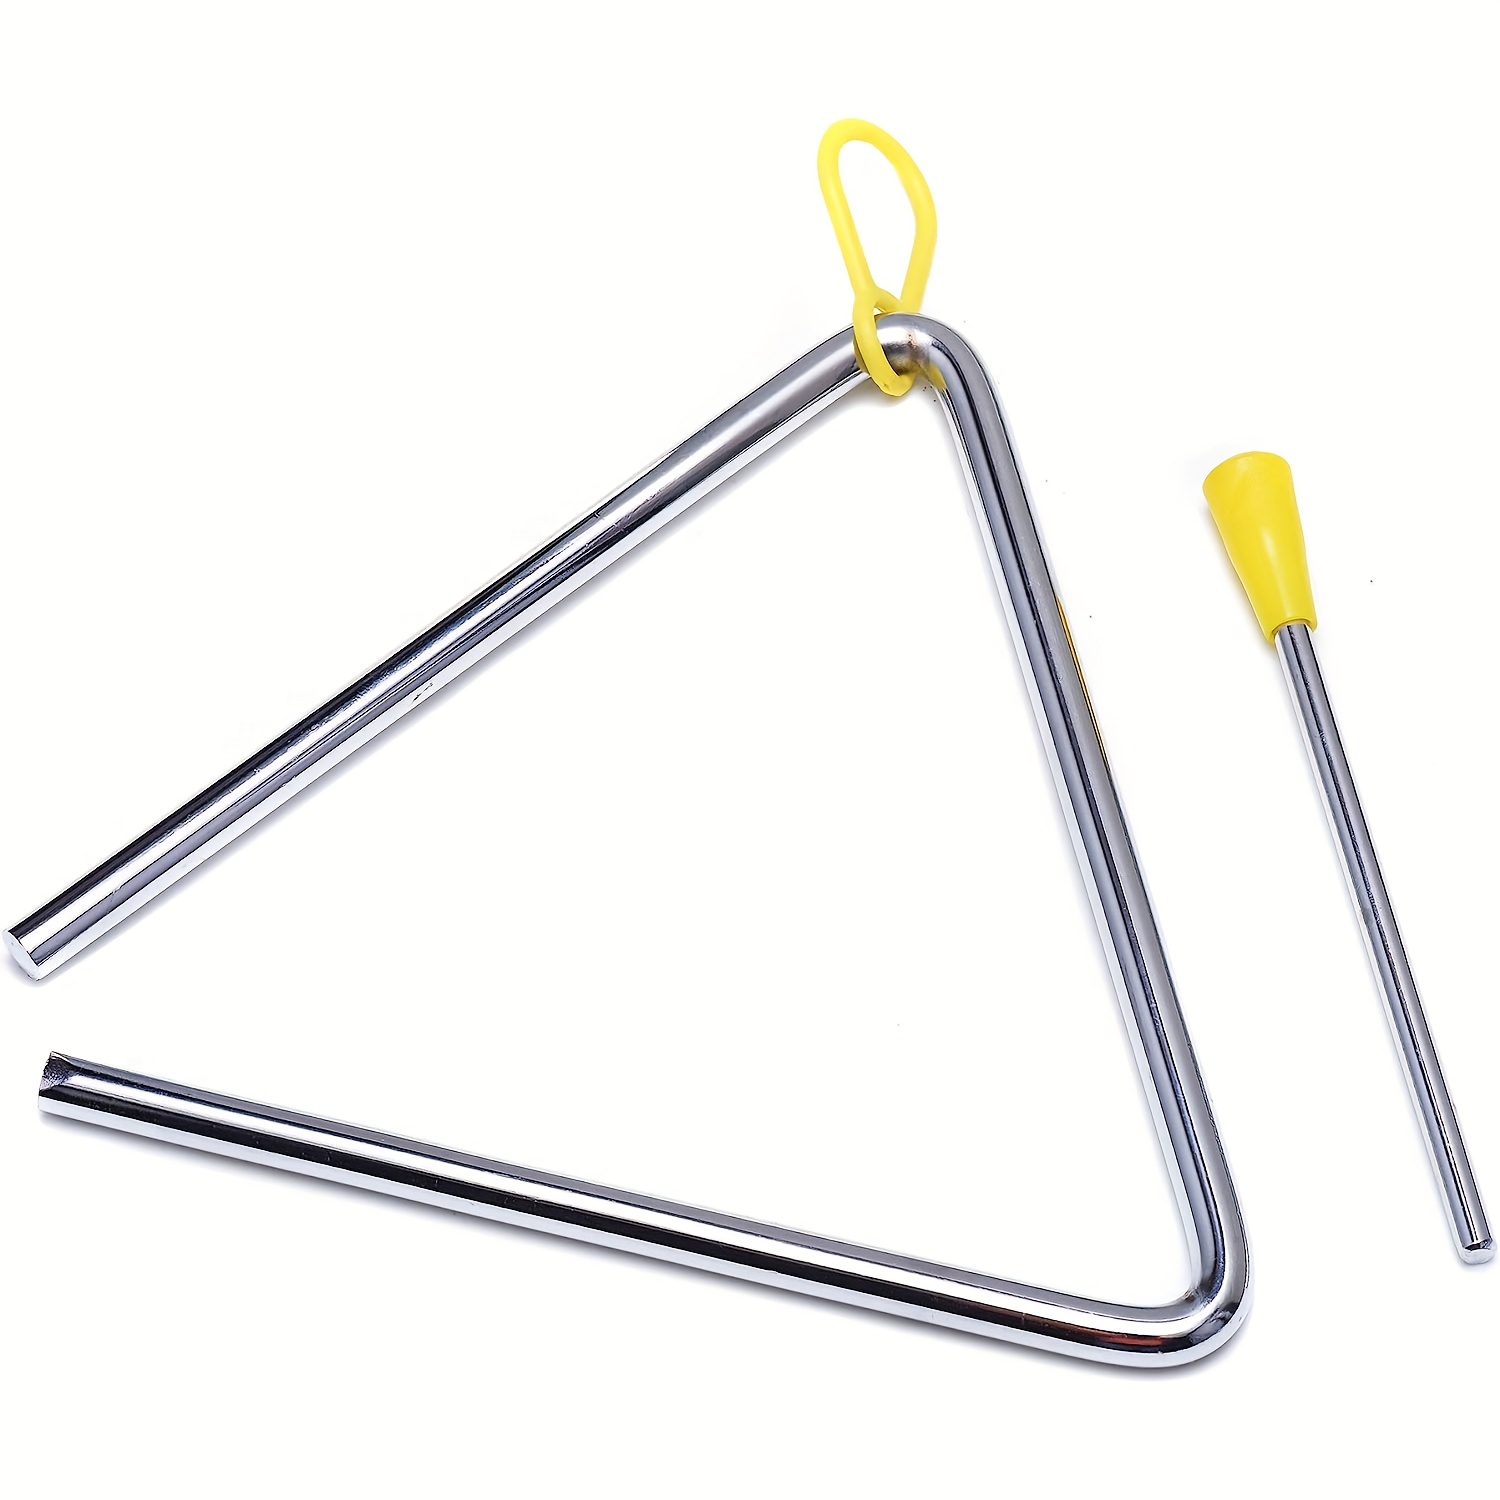 Triangle Instrument, The Triangle, Triangle Music